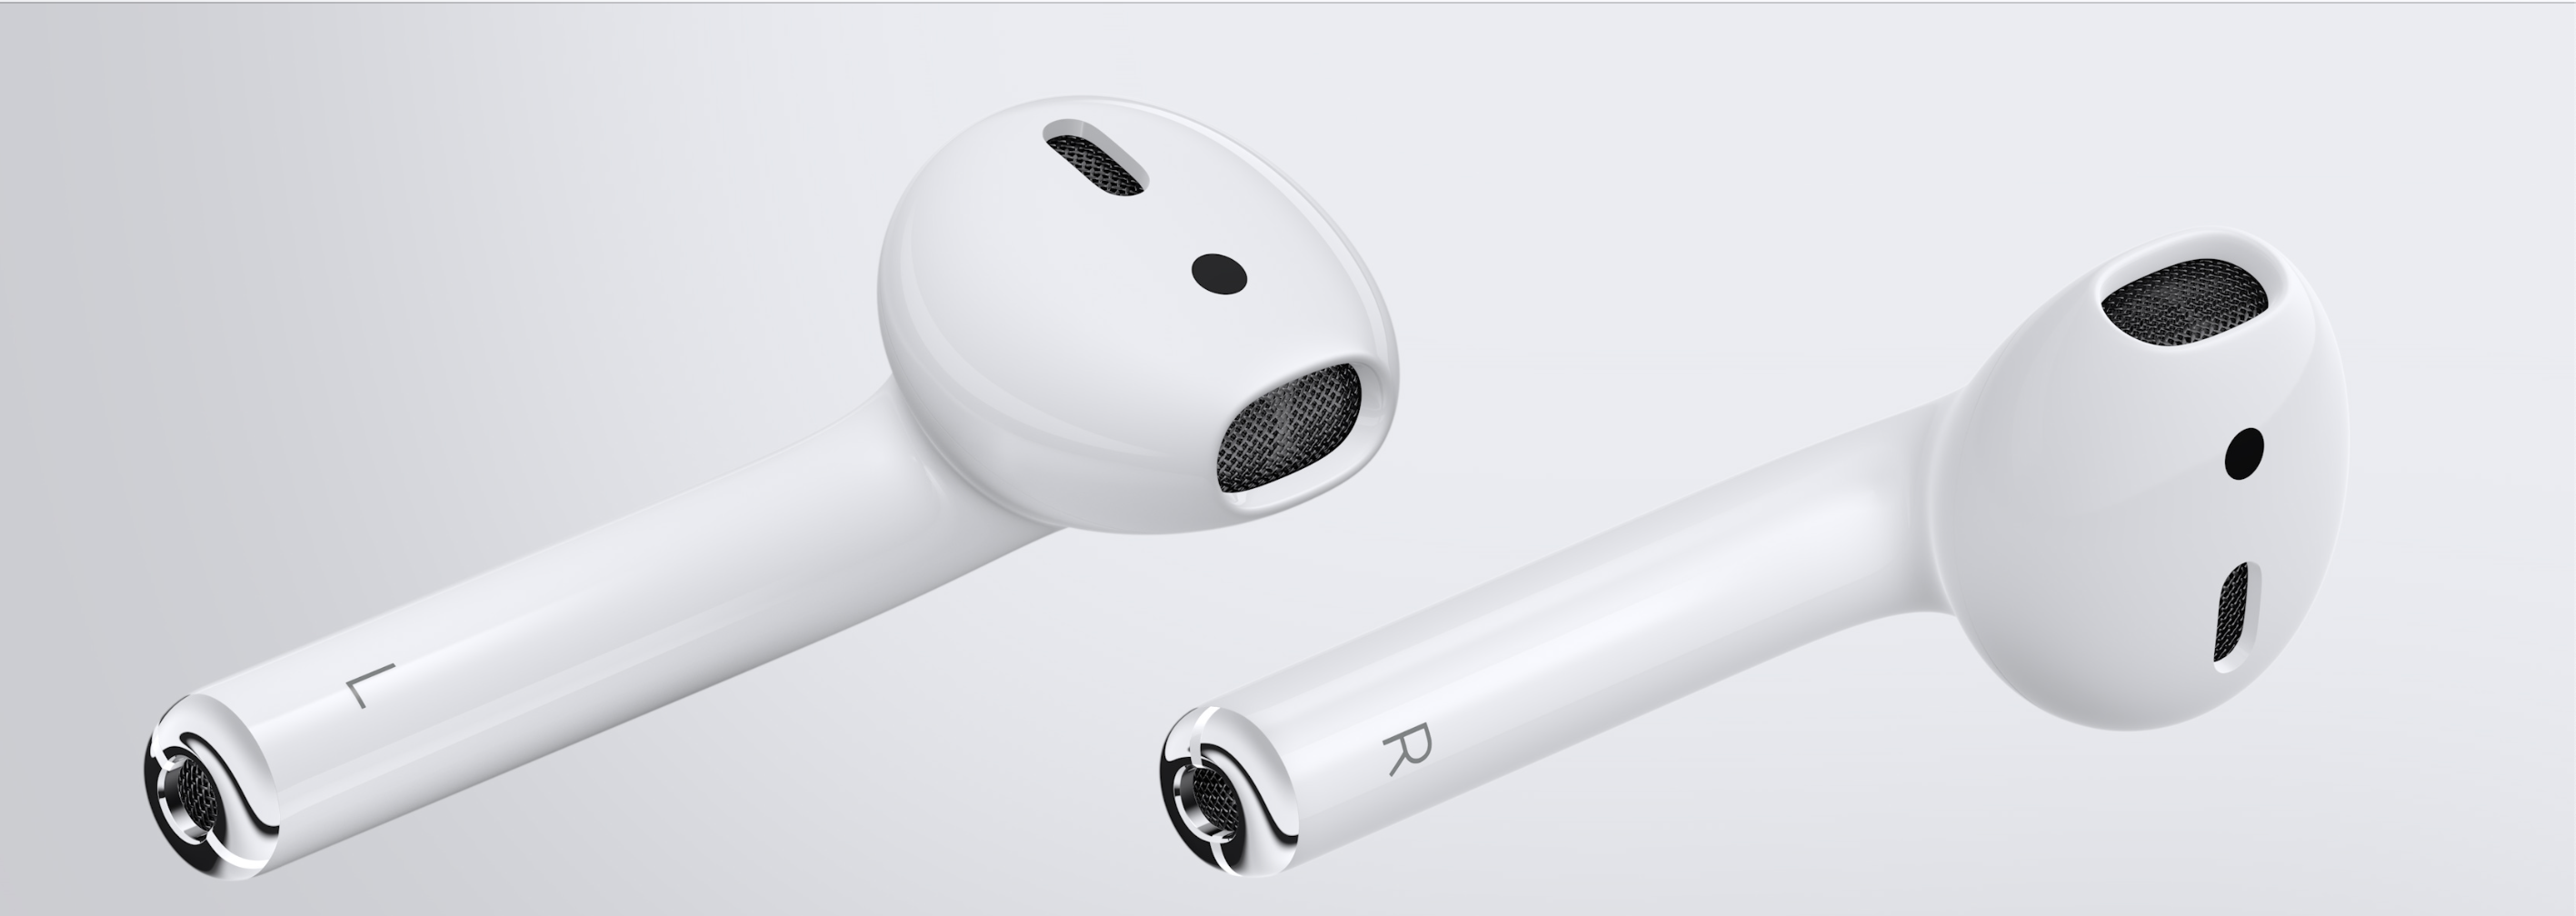 AirPods - Apple Community